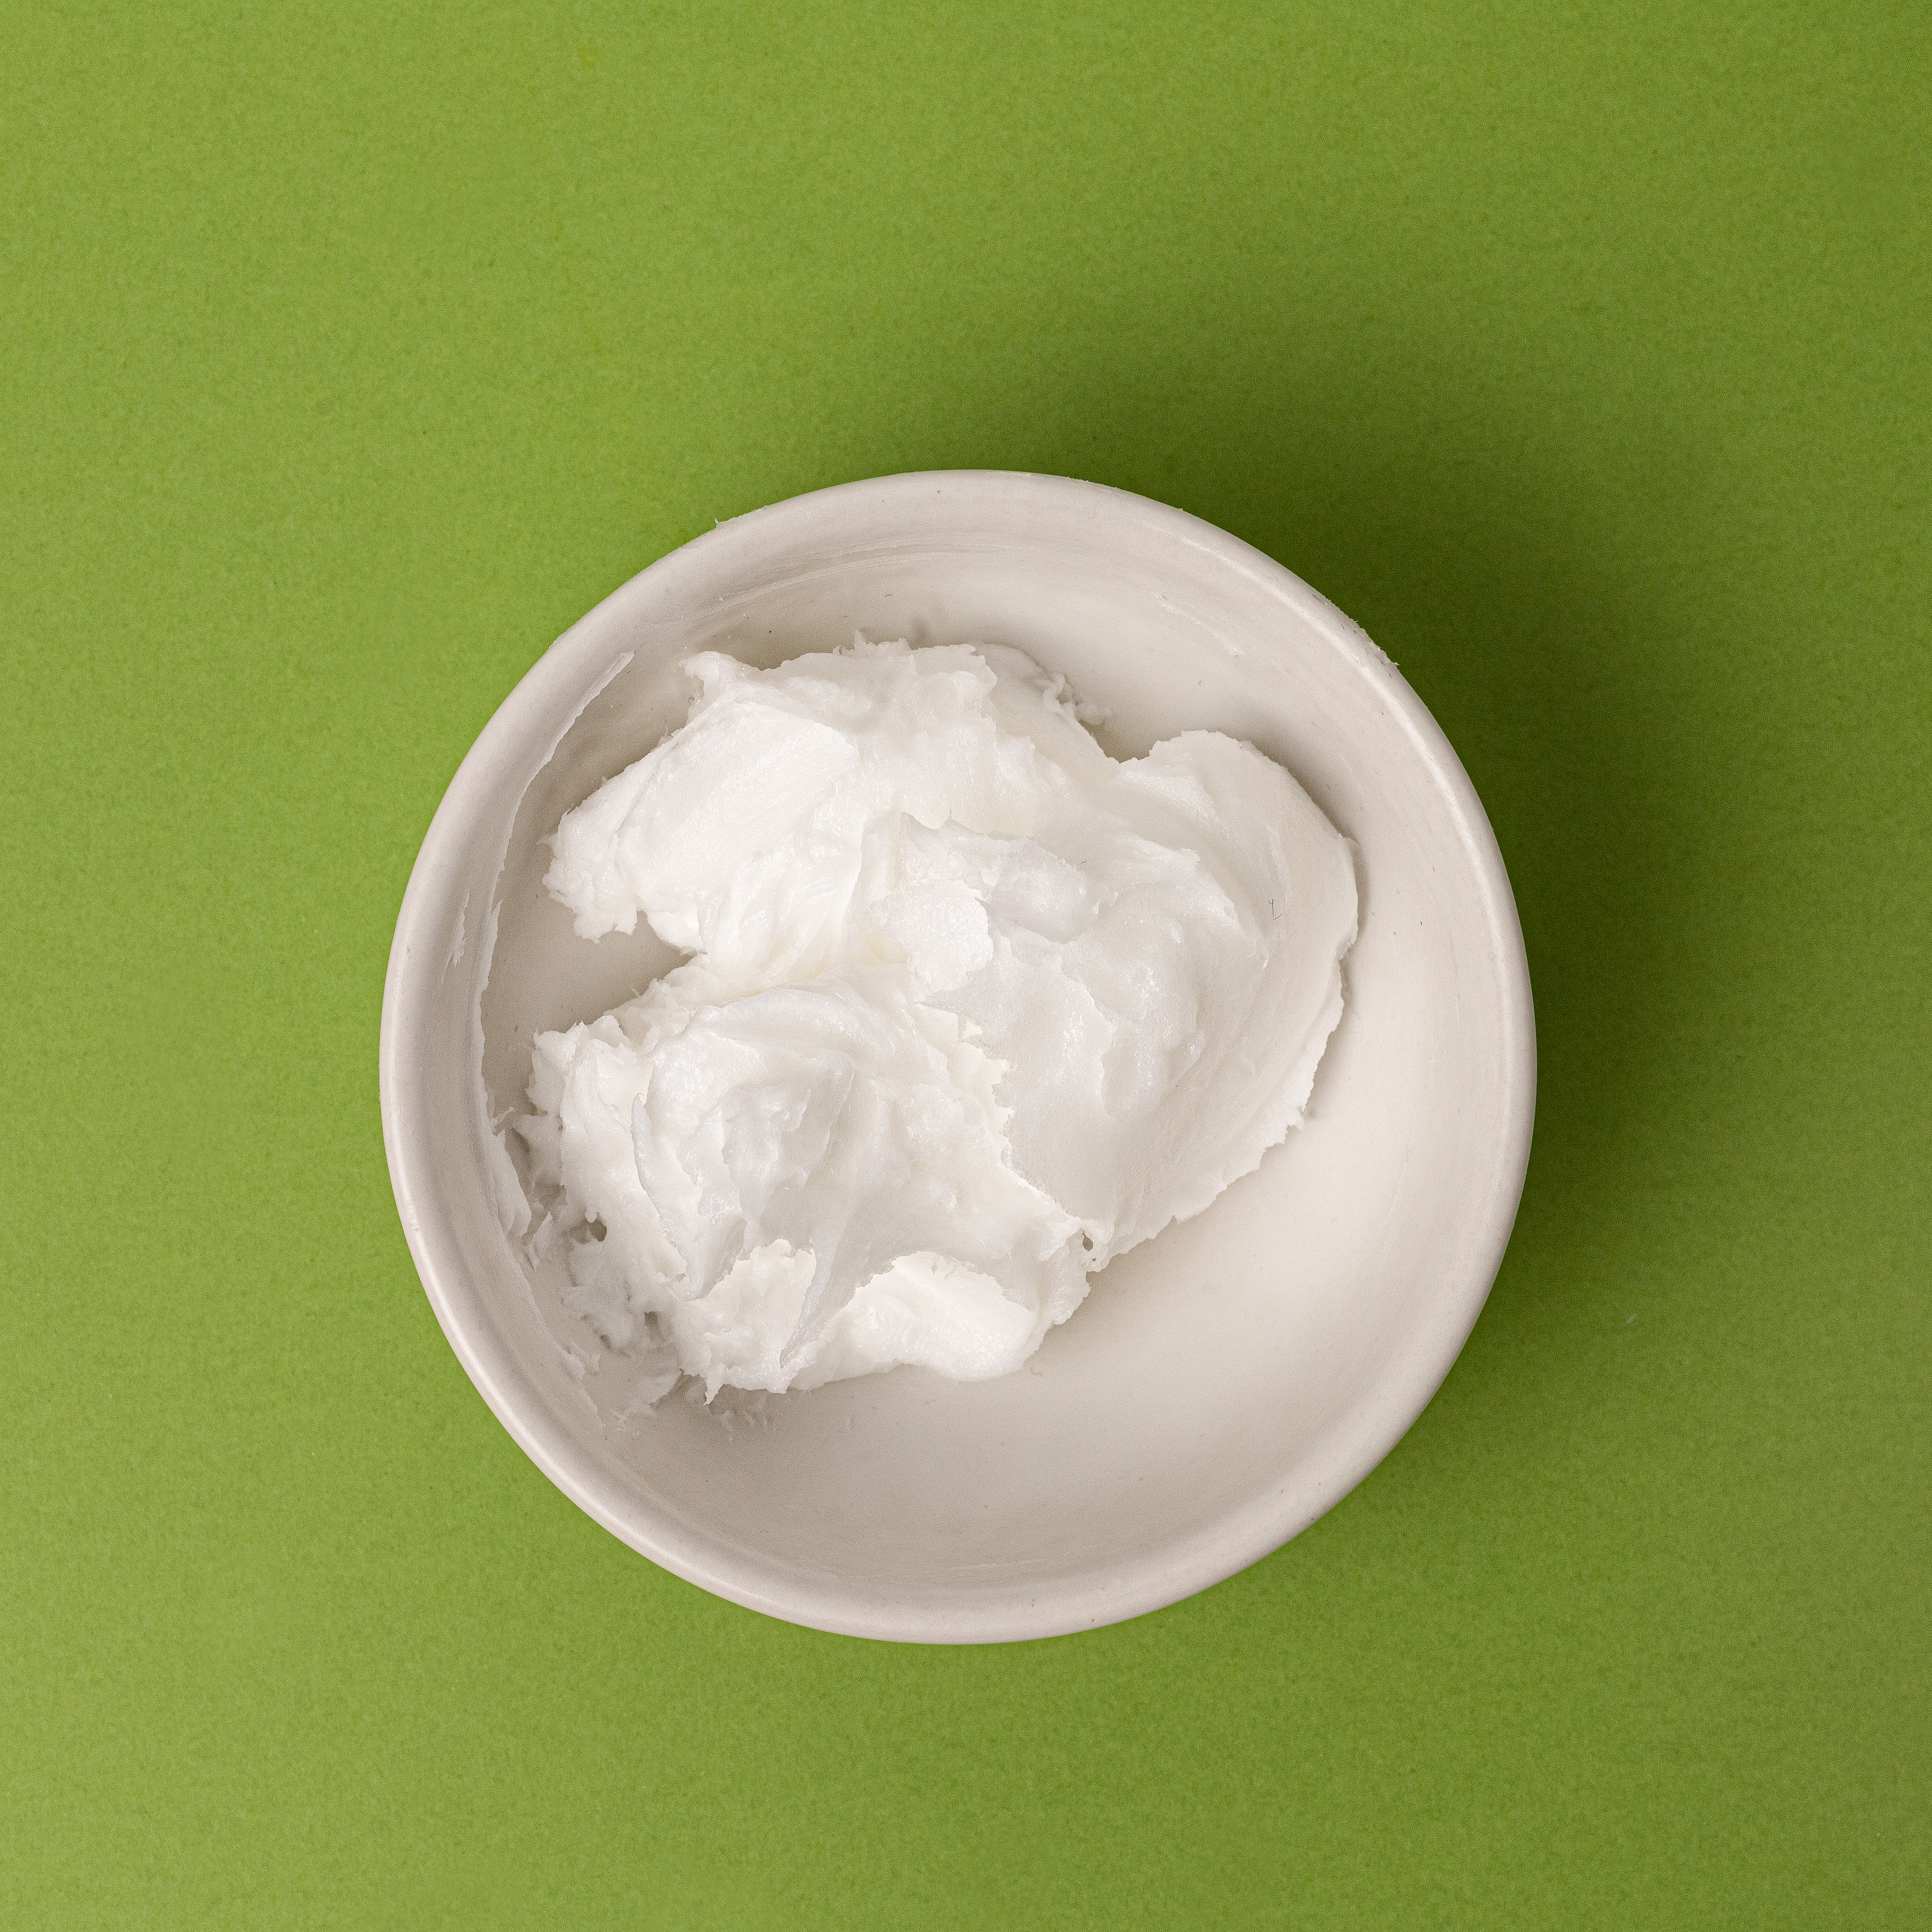 THE BEST Foaming Whipped Soap Bath Butter Base From Scratch With Recipe 